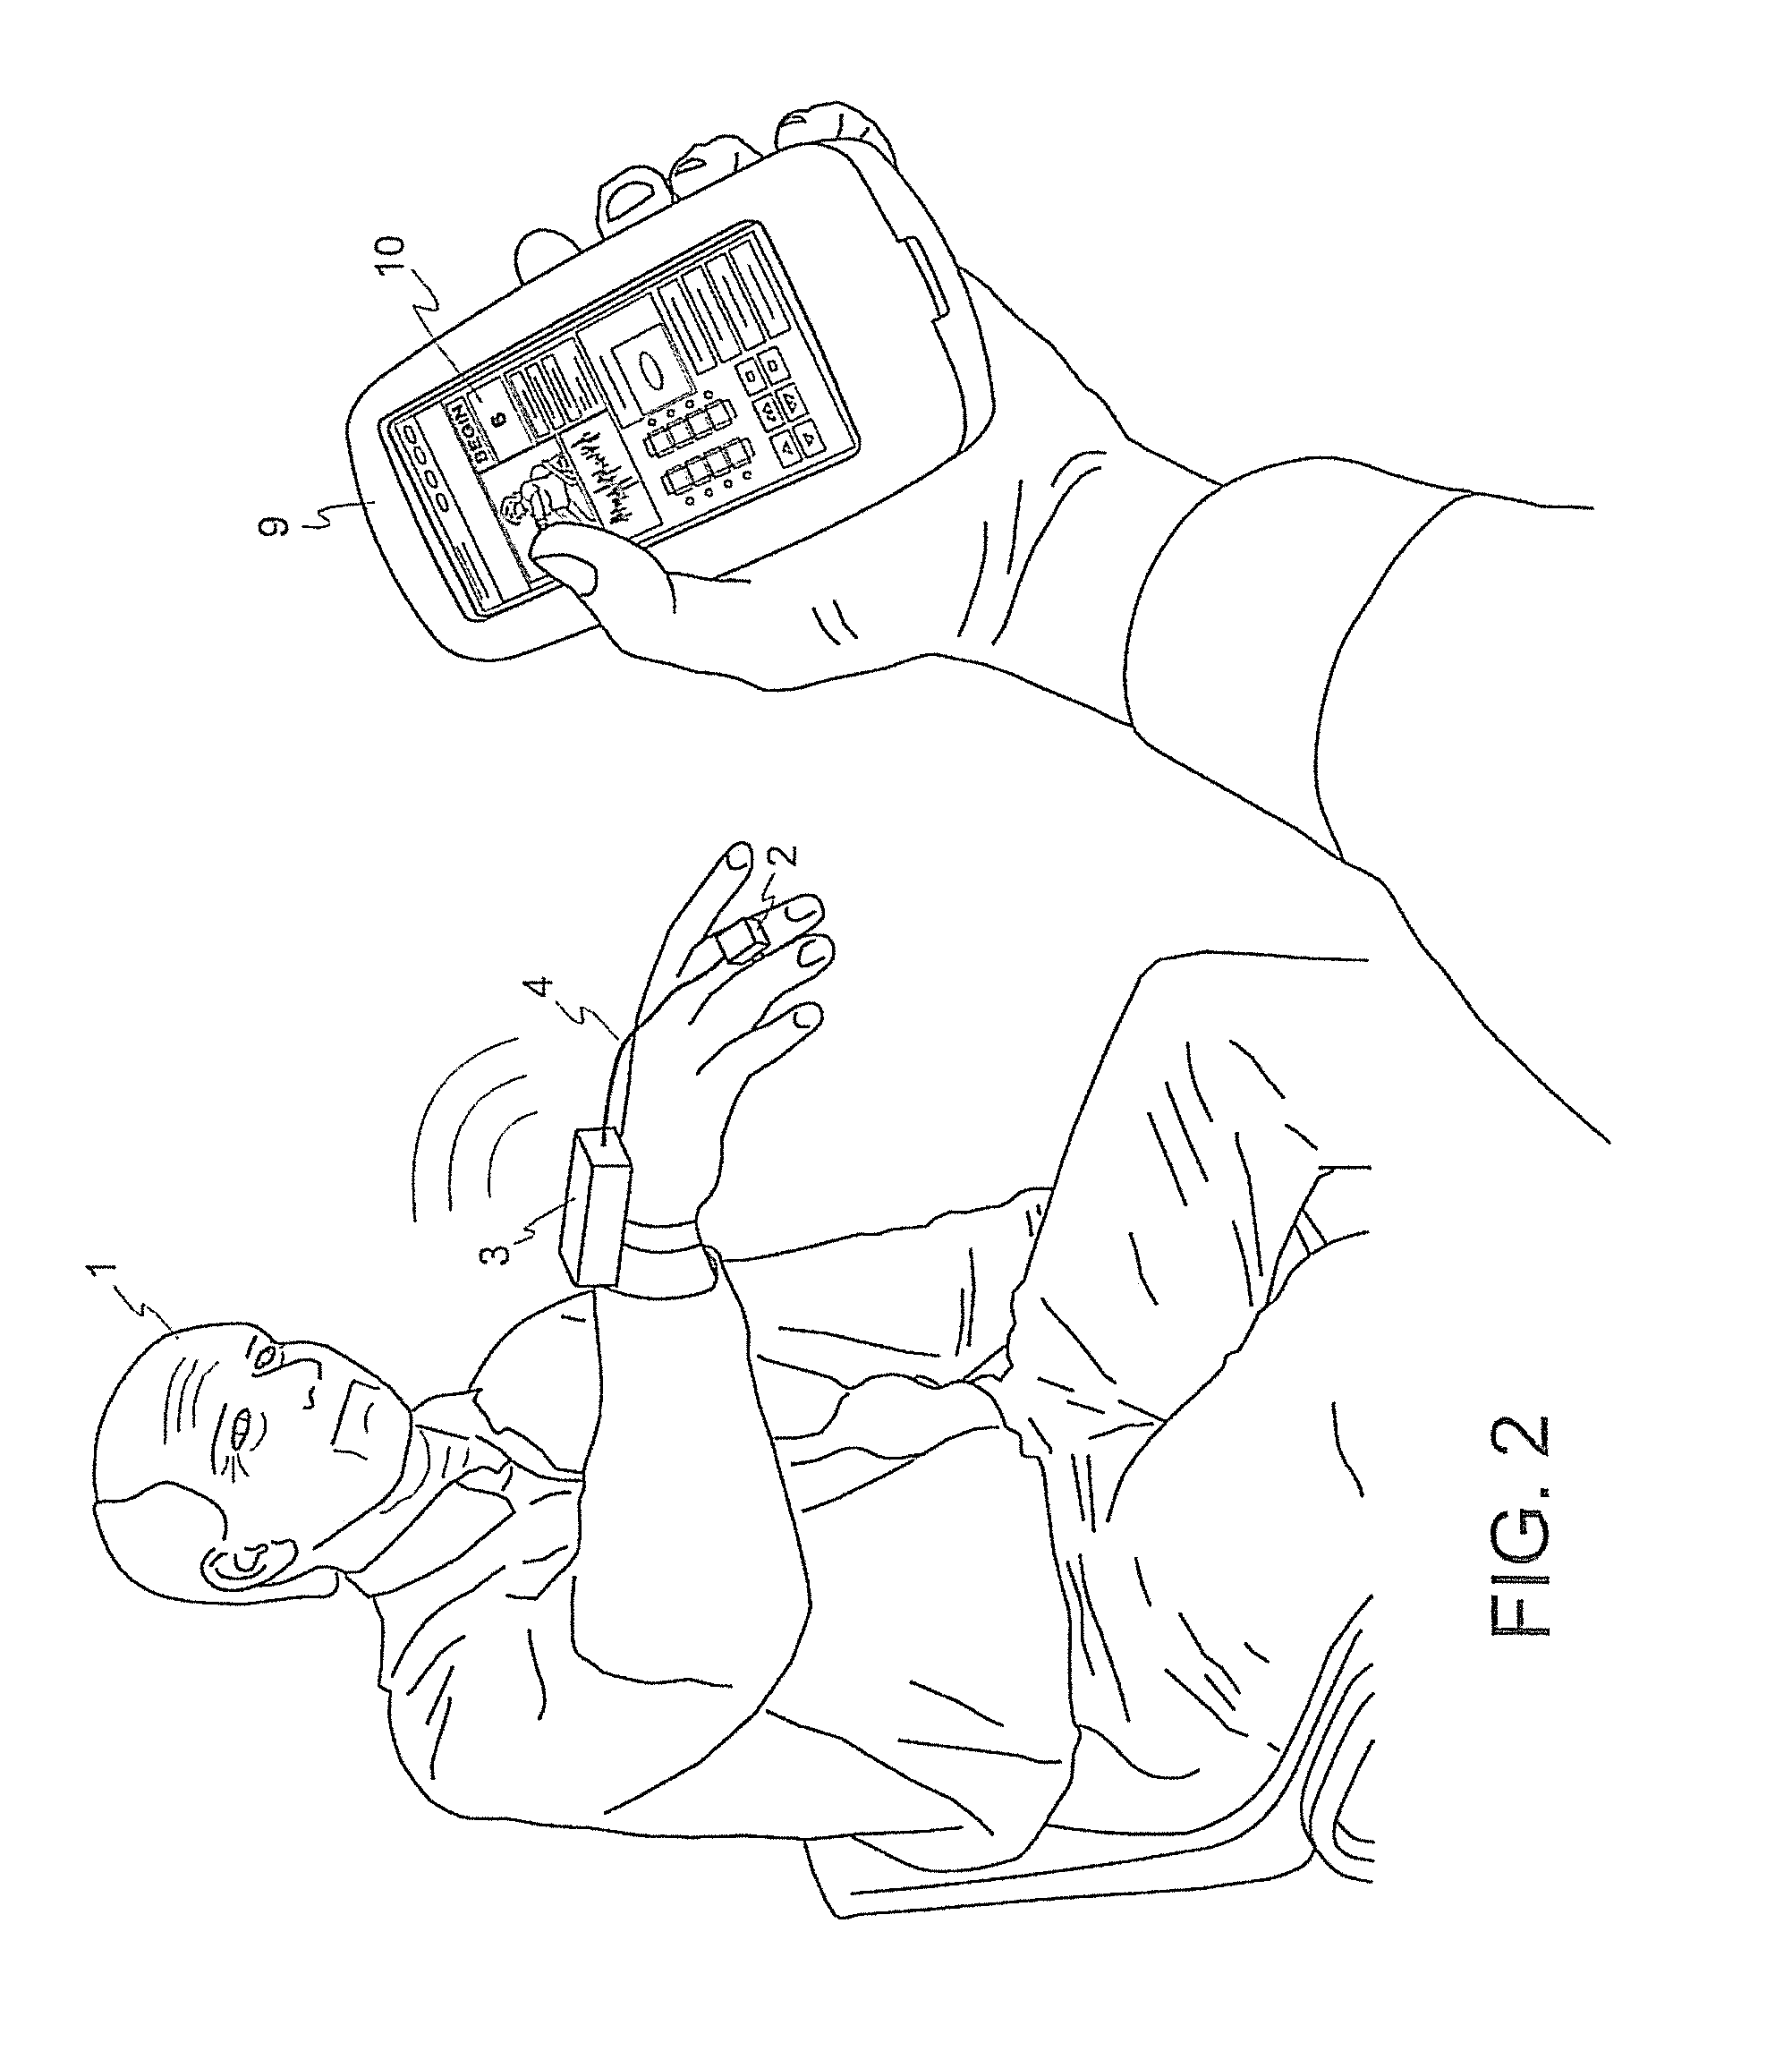 Movement disorder therapy system, devices and methods, and intelligent methods of tuning